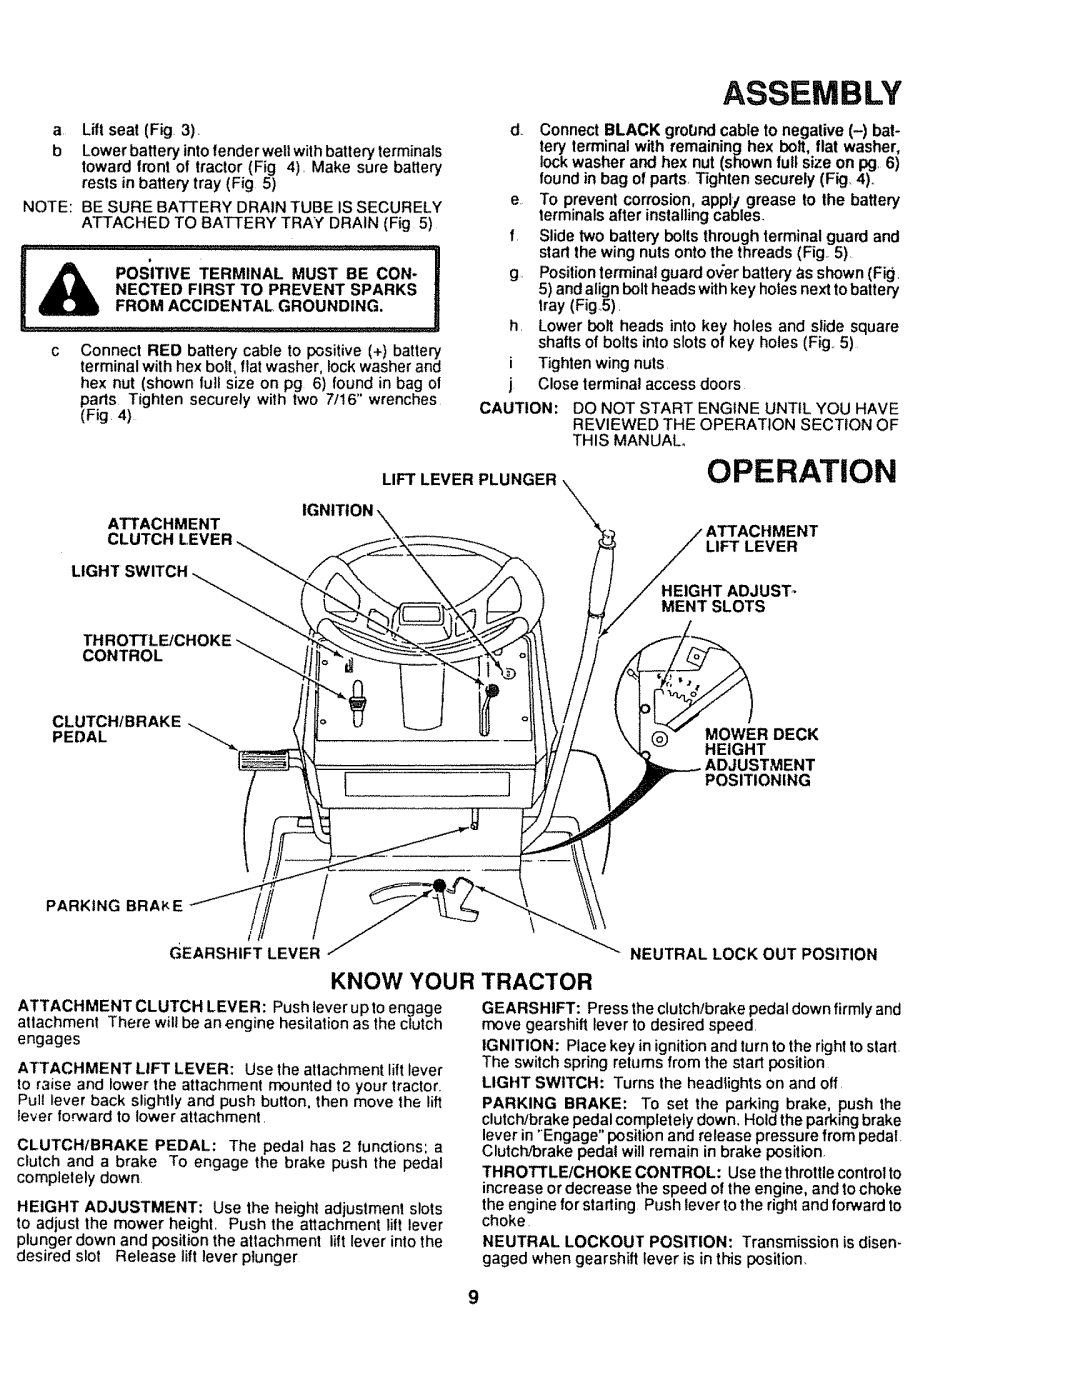 Craftsman 917.254611 owner manual Know Your, Tractor, Assembly, Operation 